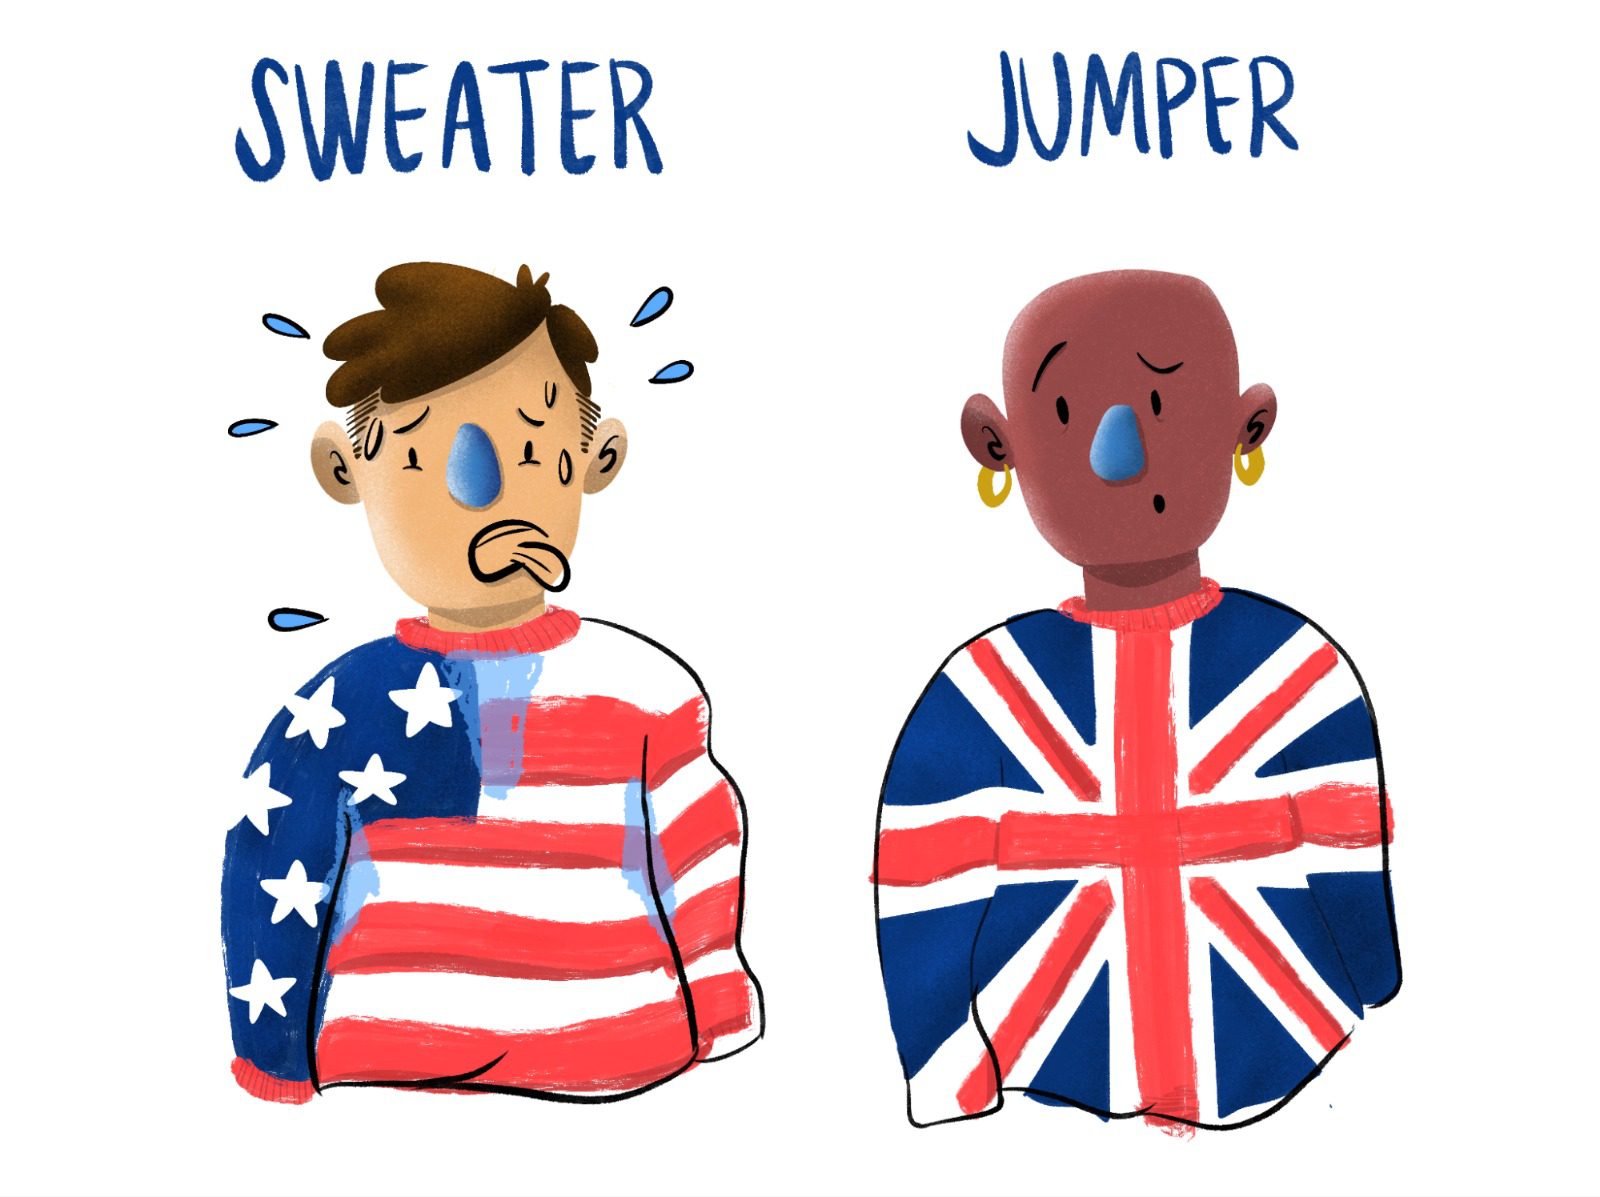 A man wearing a sweater with the American flag on it, sweating, to depict the word sweater. Next to him is a man wearing the British flag on his jumper.